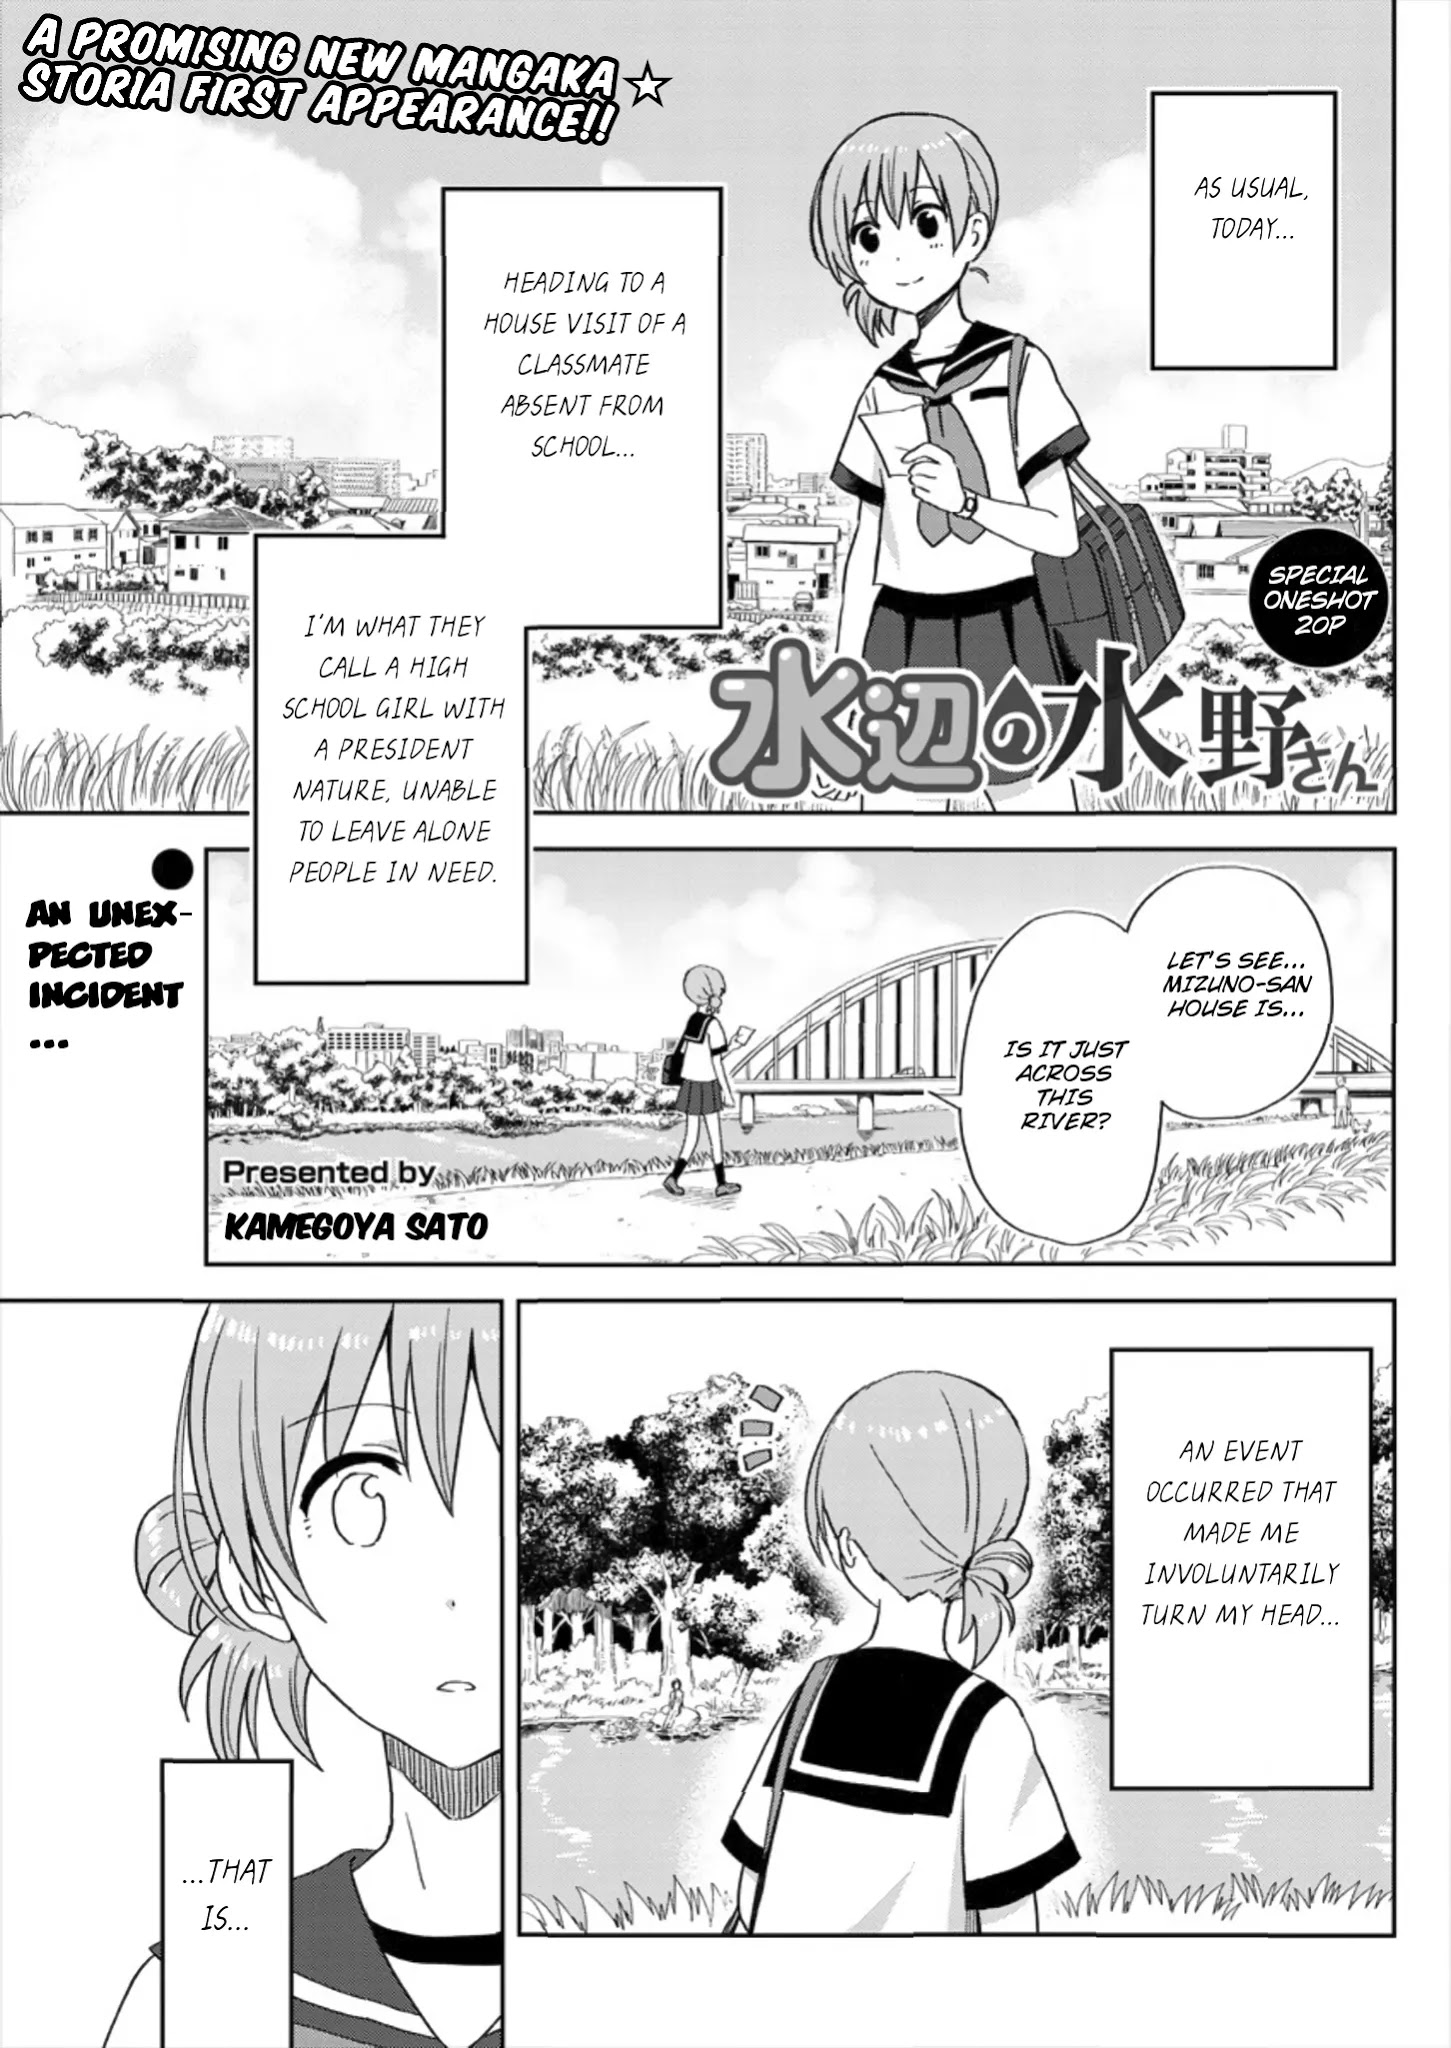 Mizube No Mizuno-San Chapter 1: An Unexpected Incident - Picture 1